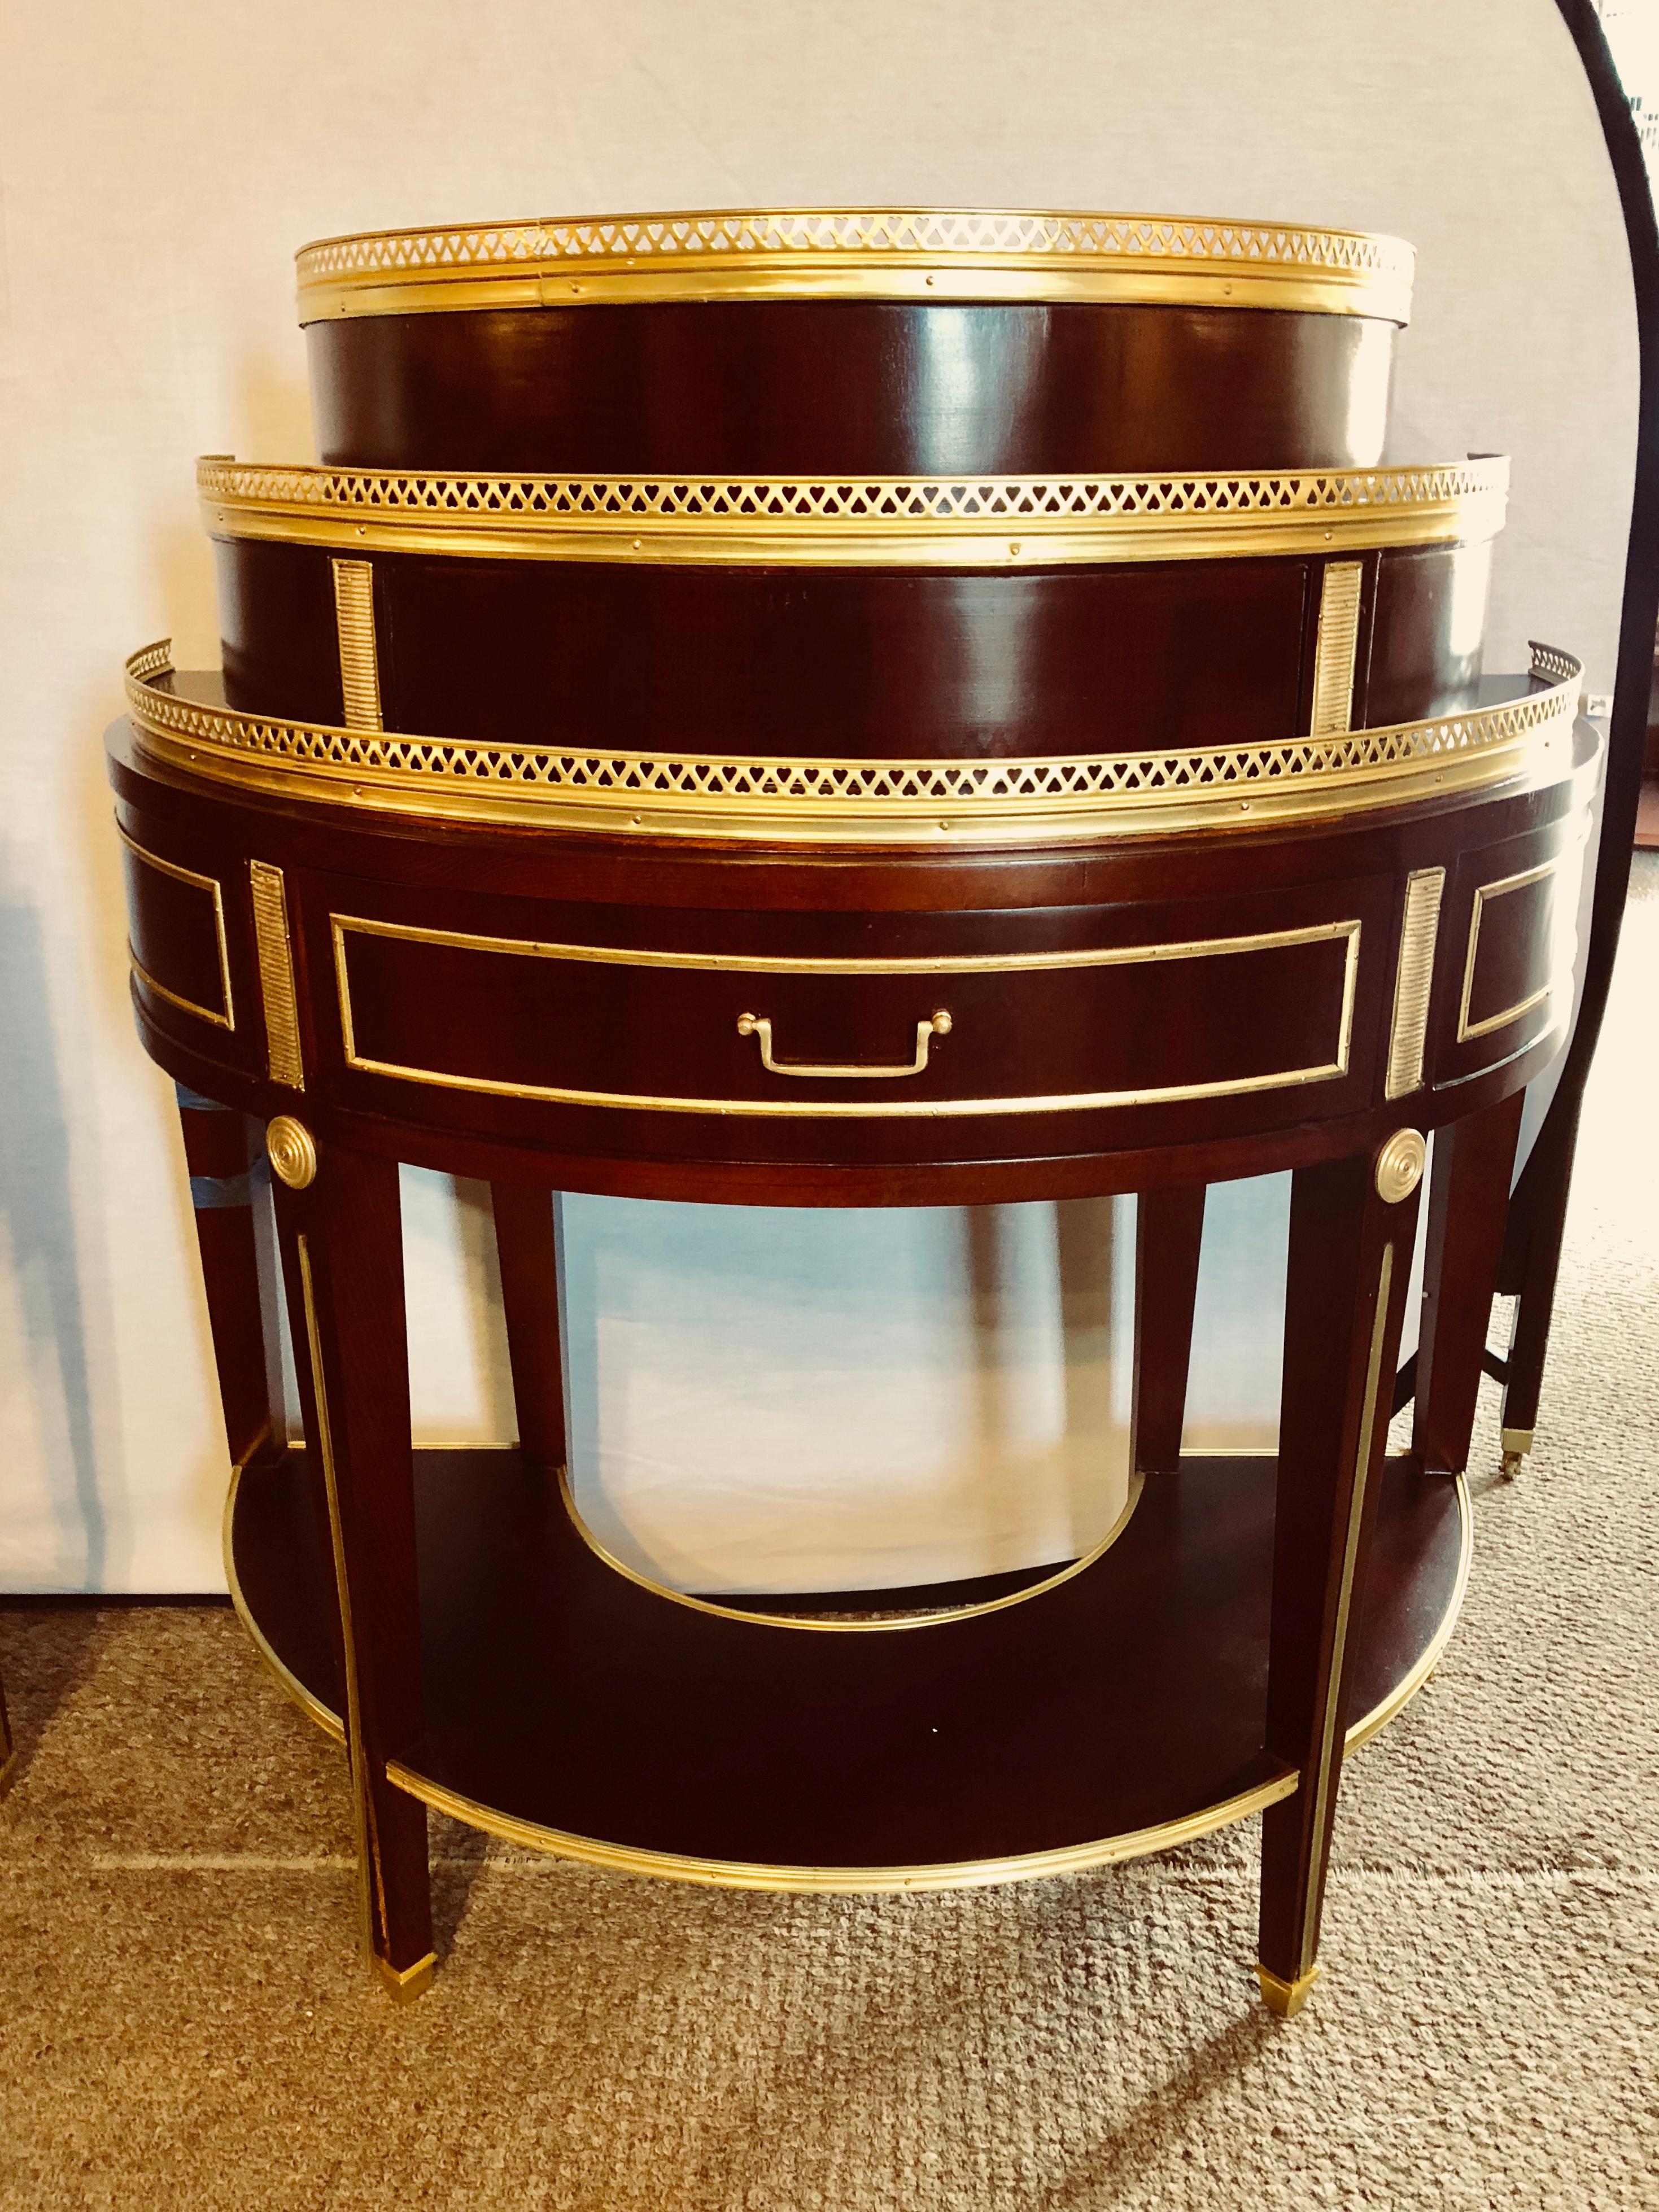 A fine pair of Russian neoclassical pedestal style demilune end tables or nightstand / commodes. Each of these custom quality demilunes are simply stunning and are certain to spark conversation. The tapering bronze fluted legs having a bronze framed